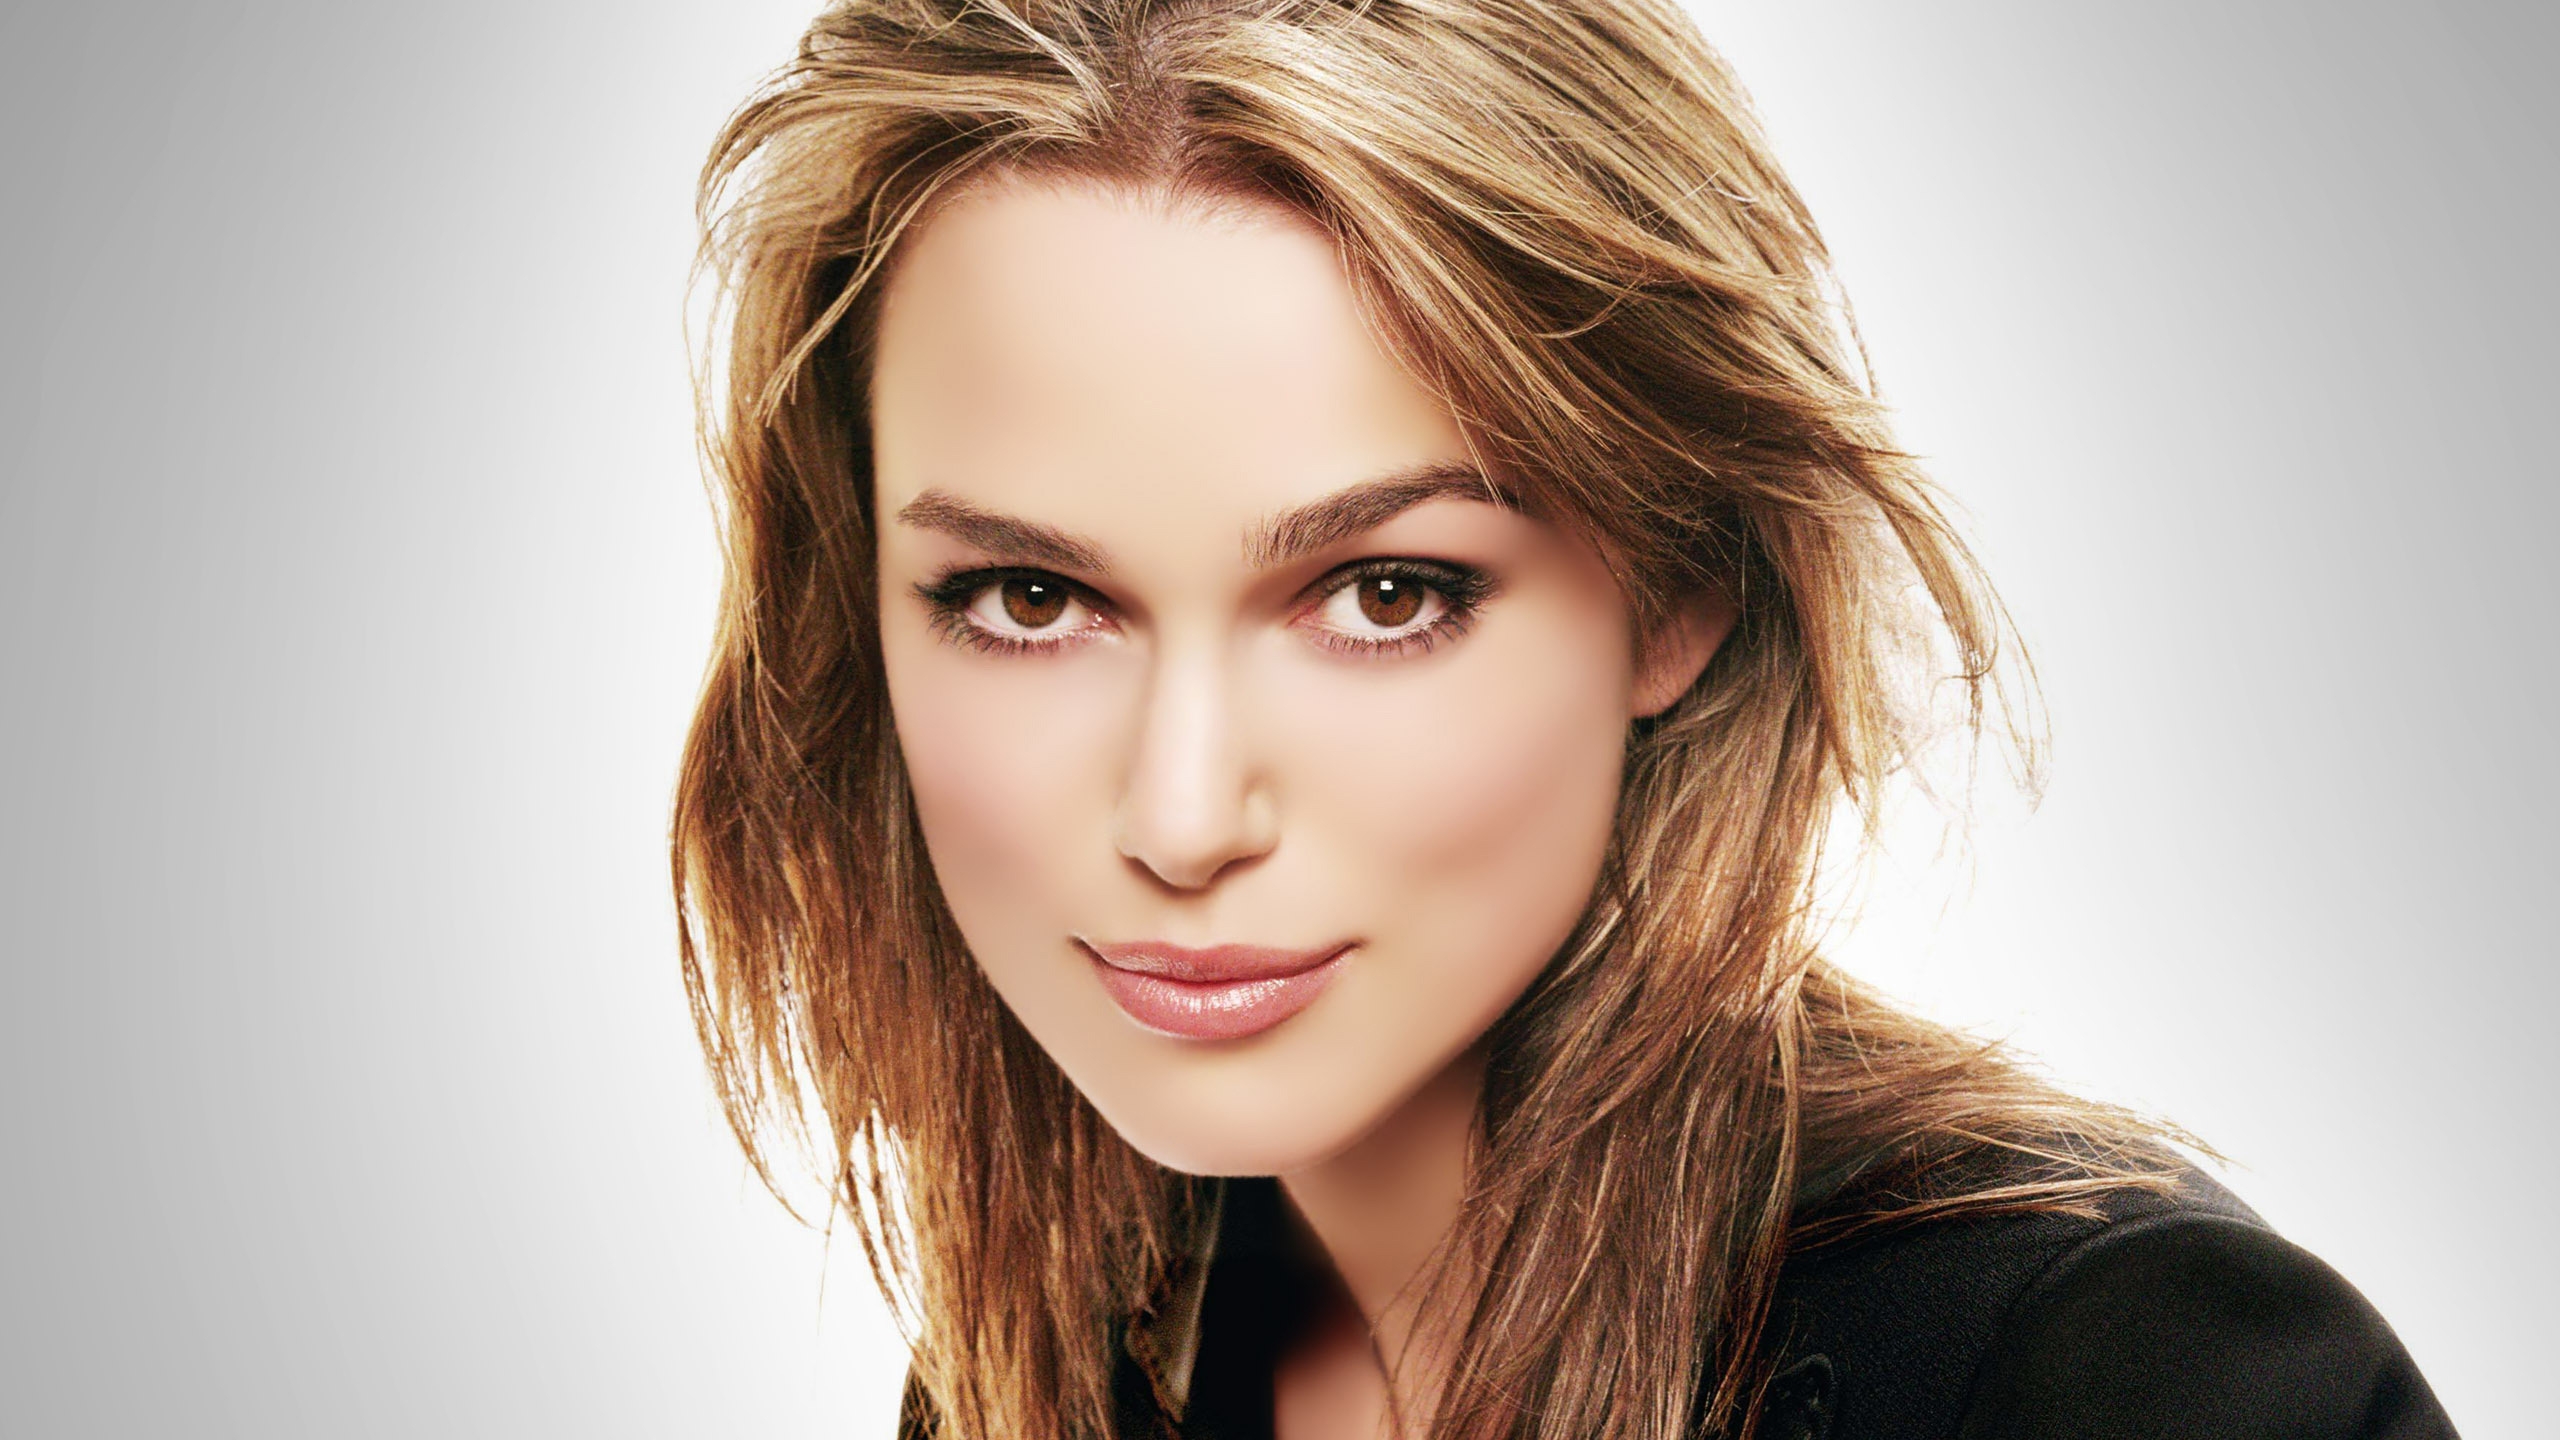 Beautiful Keira Knightley for 2560x1440 HDTV resolution